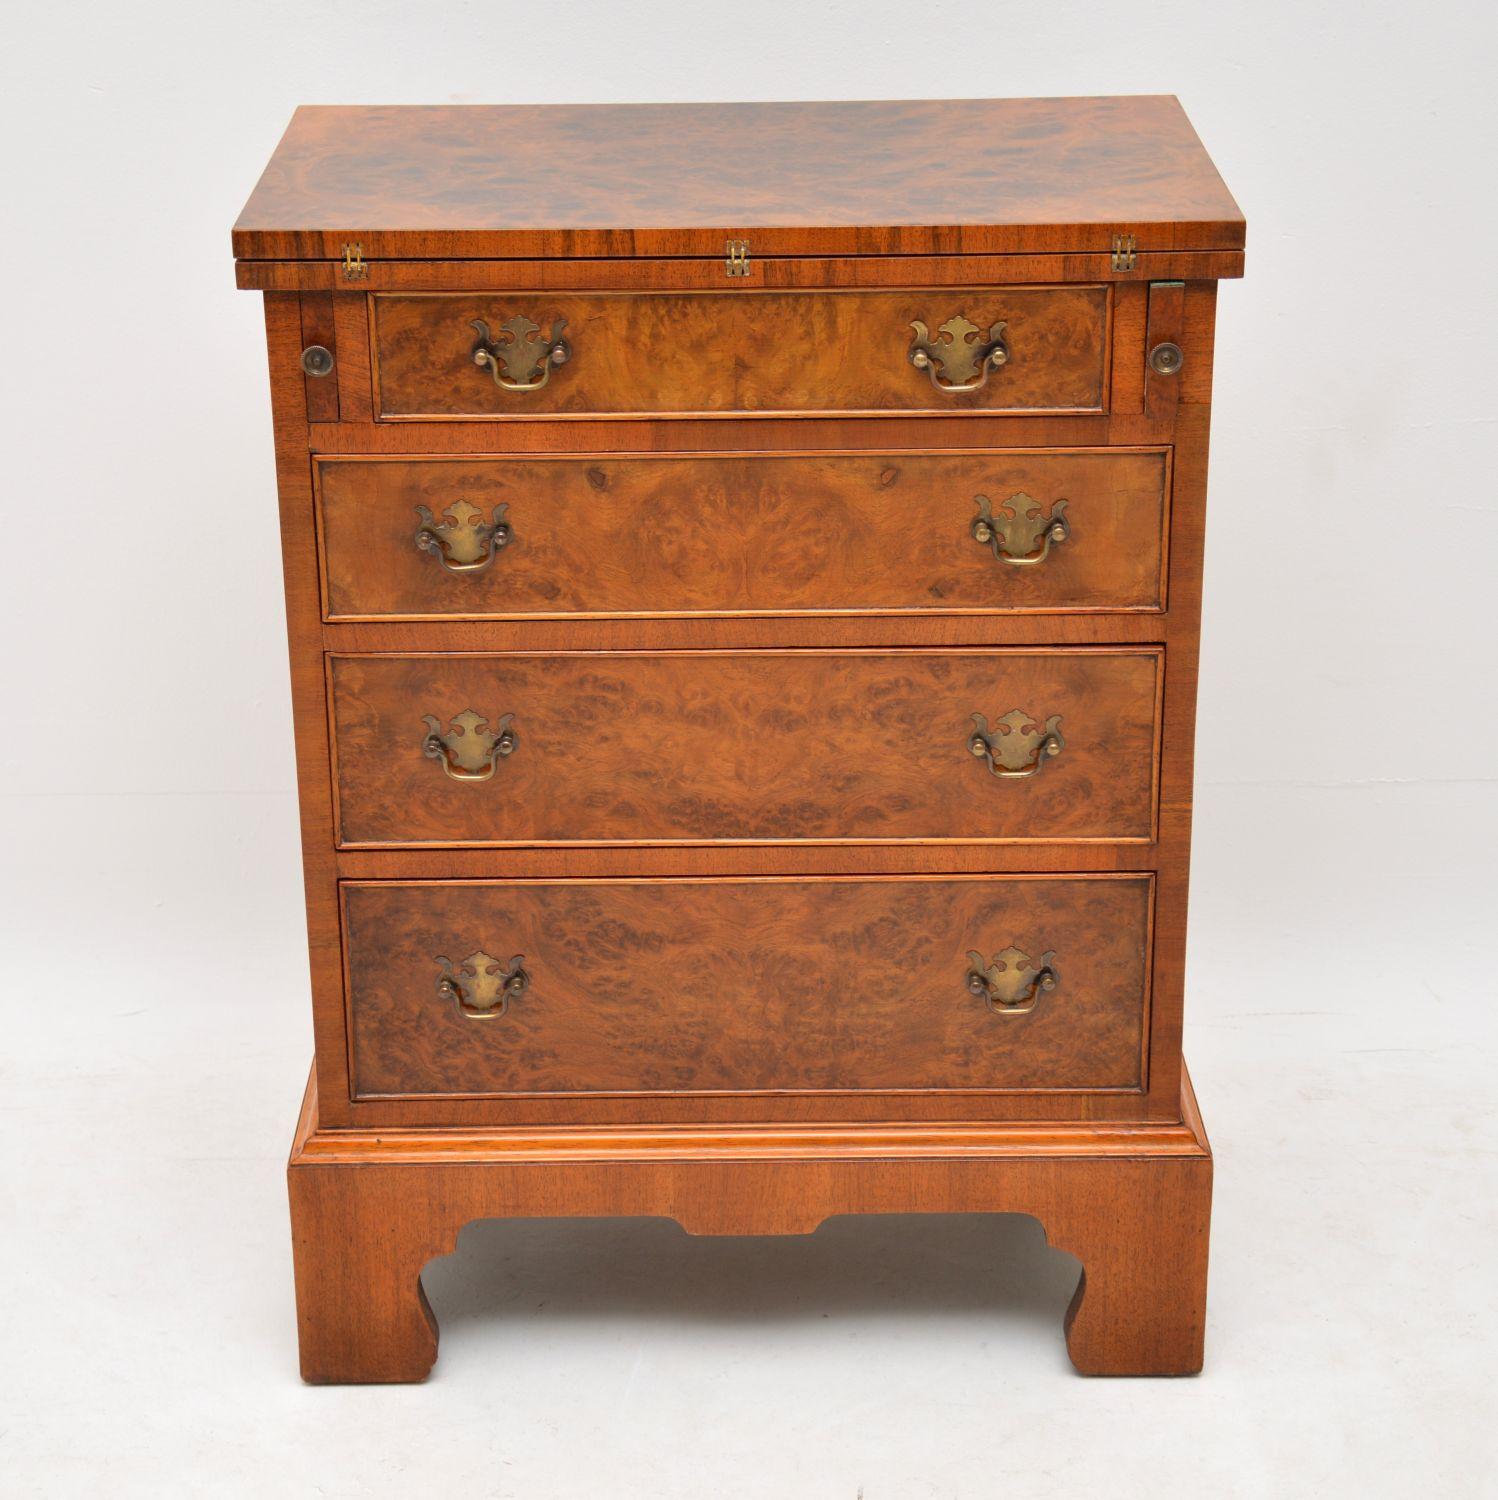 Small antique bur walnut bachelors chest of drawers with a useful fold over top that is supported on two pull out loafers. This chest is in excellent condition, having just been French polished & it dates to around the 1930s period. It has four